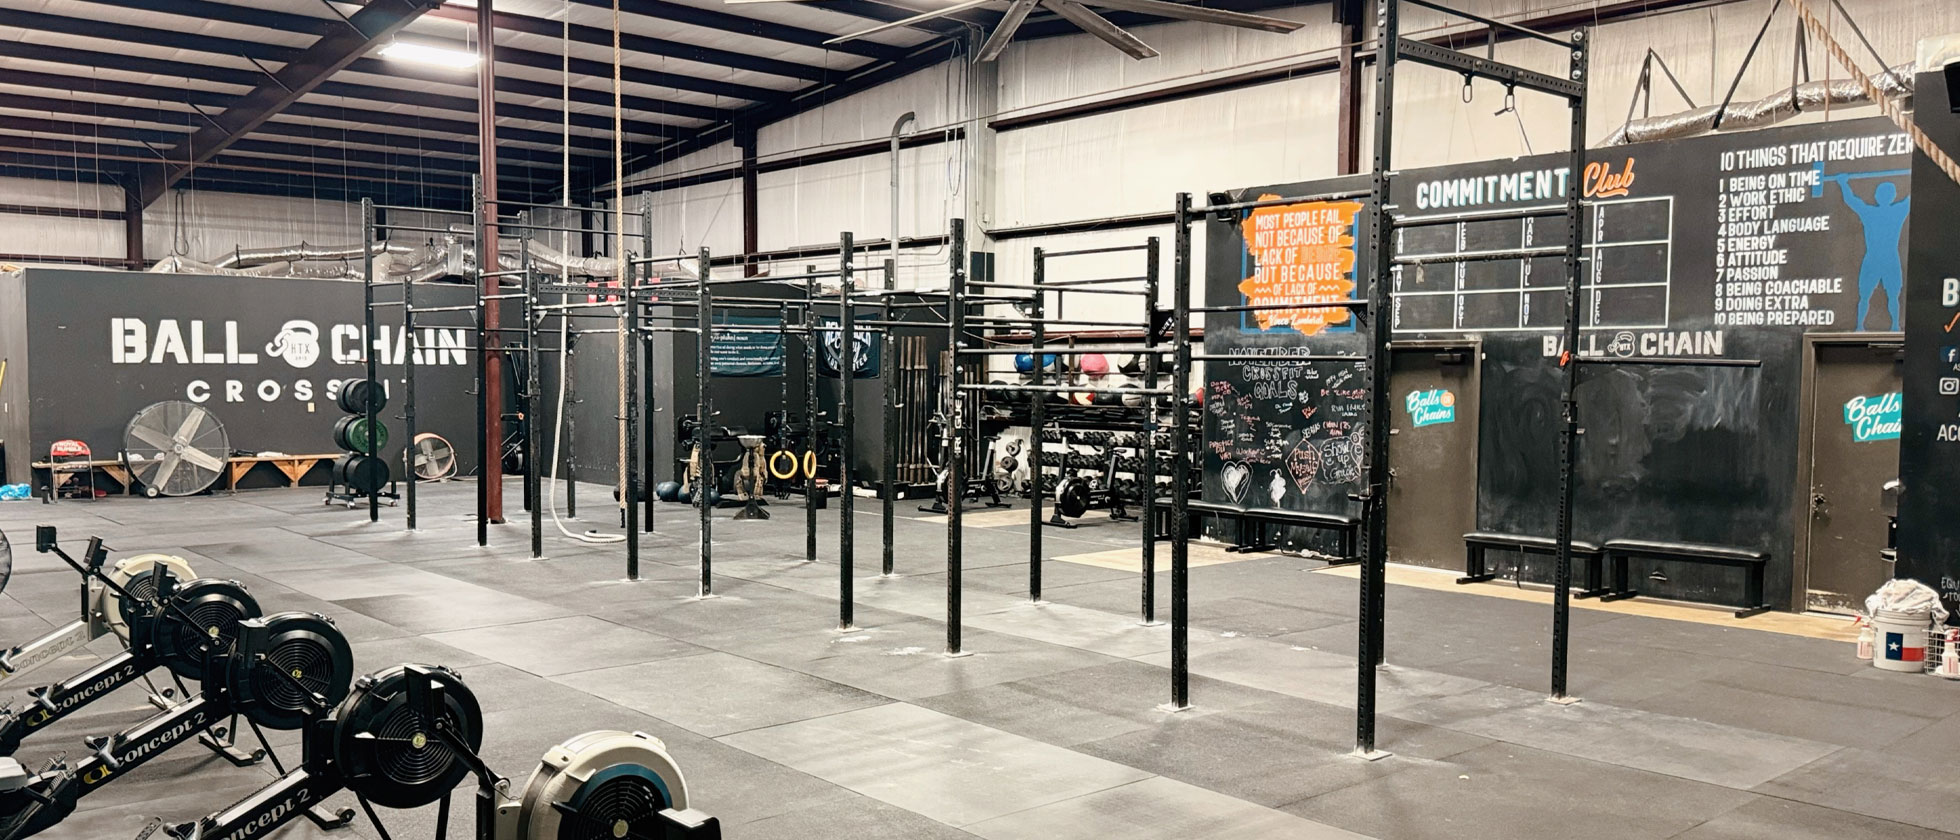 Check Out Our CrossFit Gym In Houston, TX